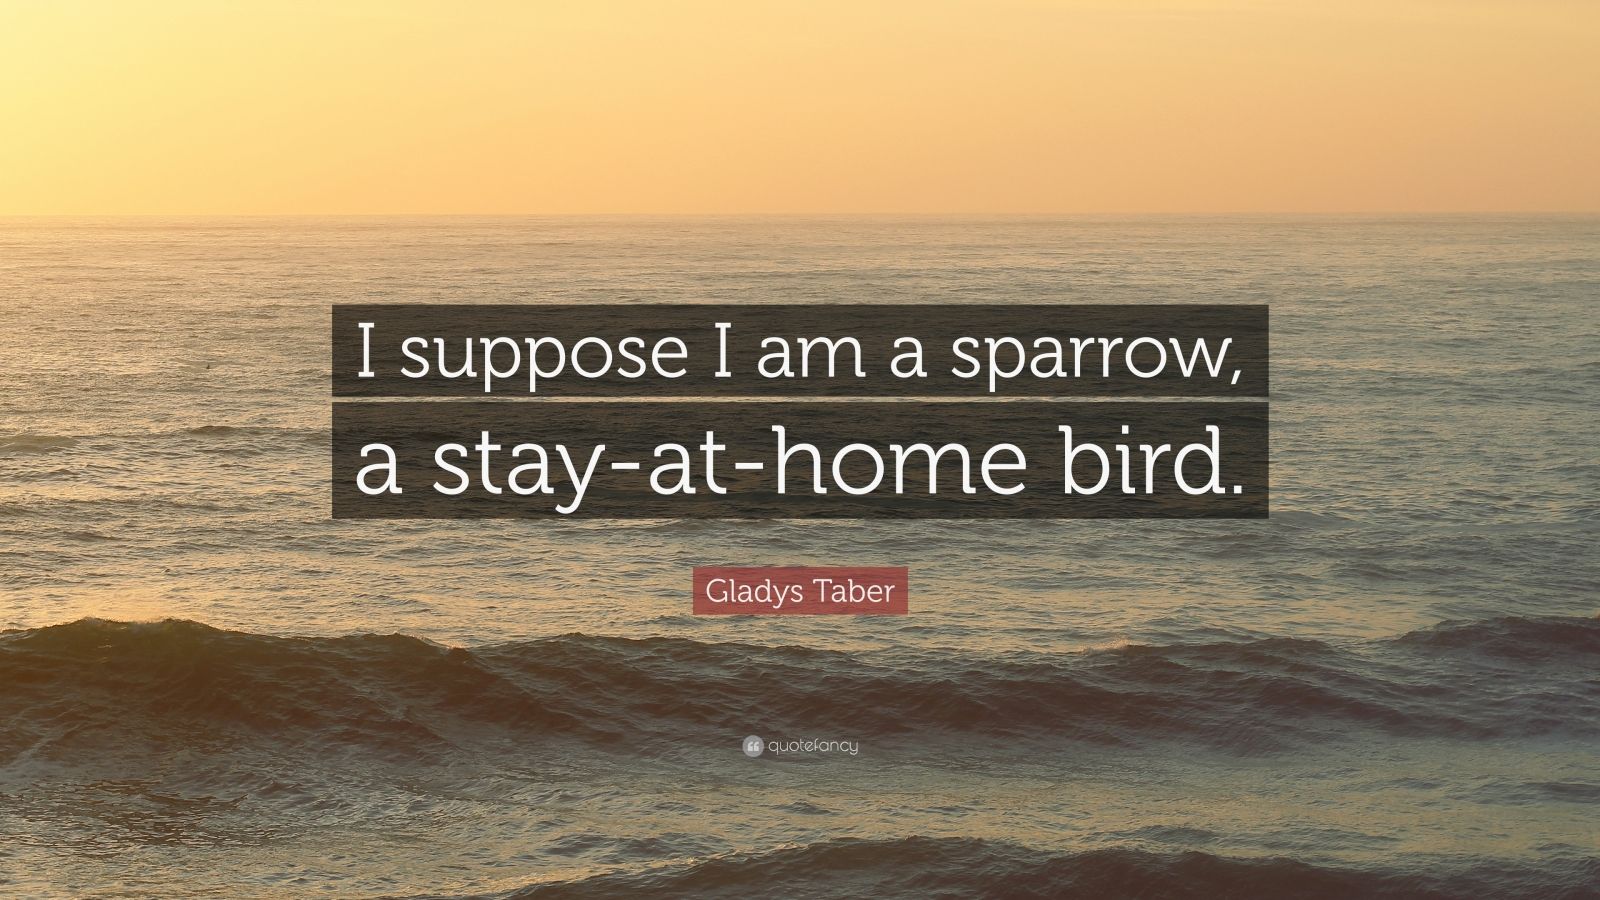 gladys taber quote about flowers